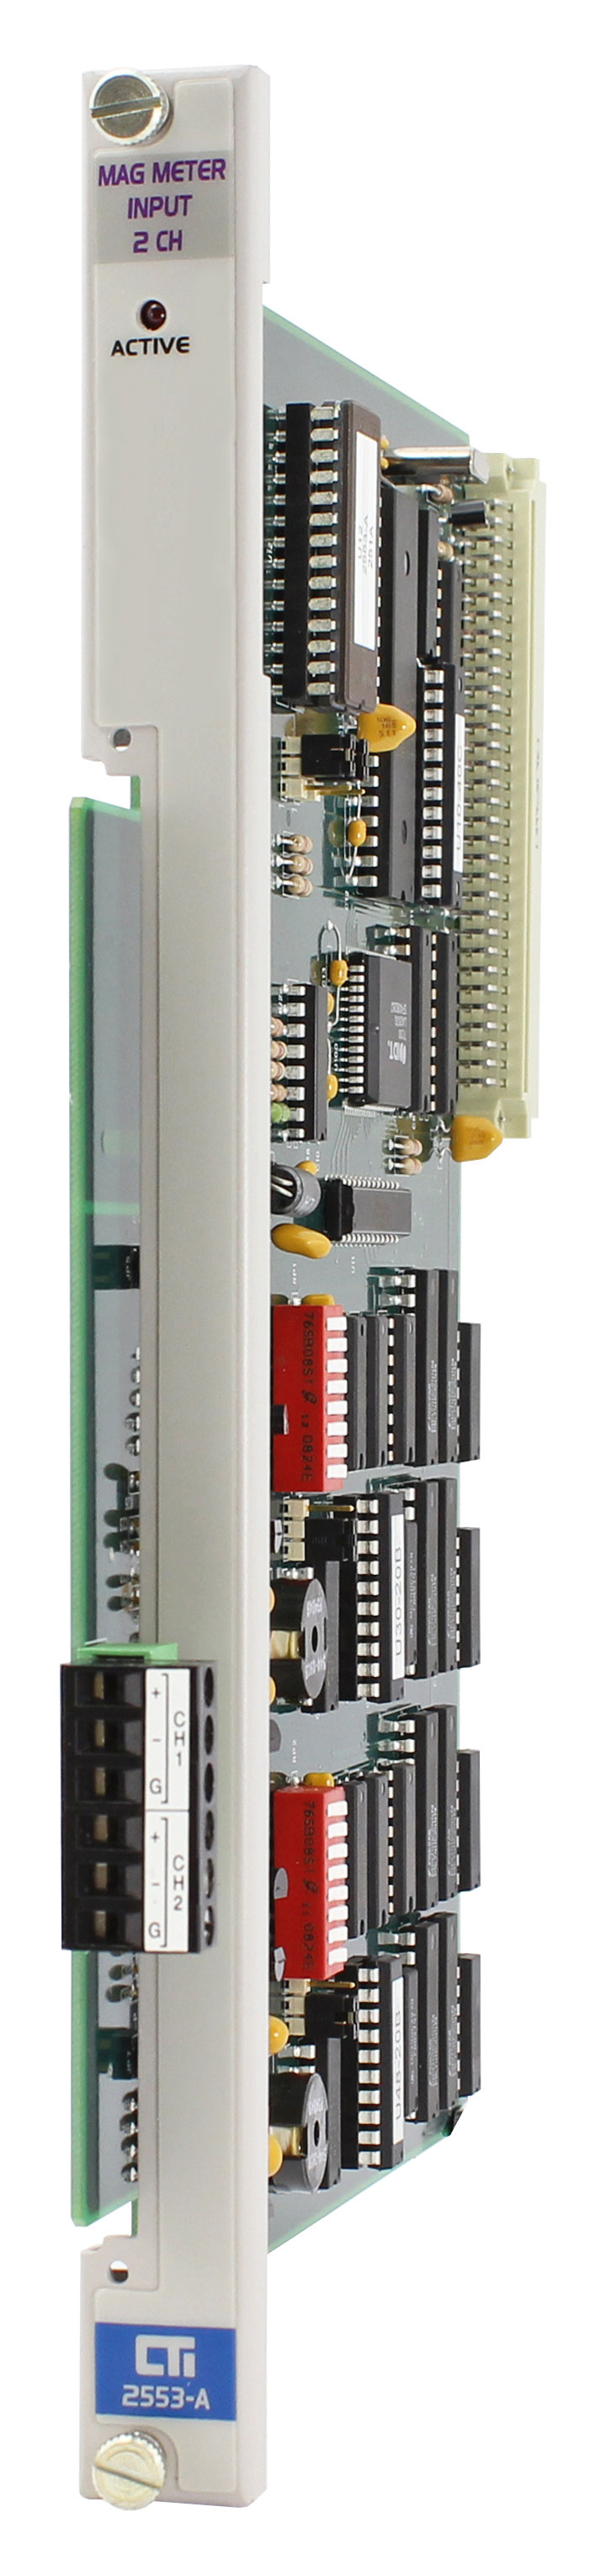 2553-A 2-Channel Mag Meter Input Module